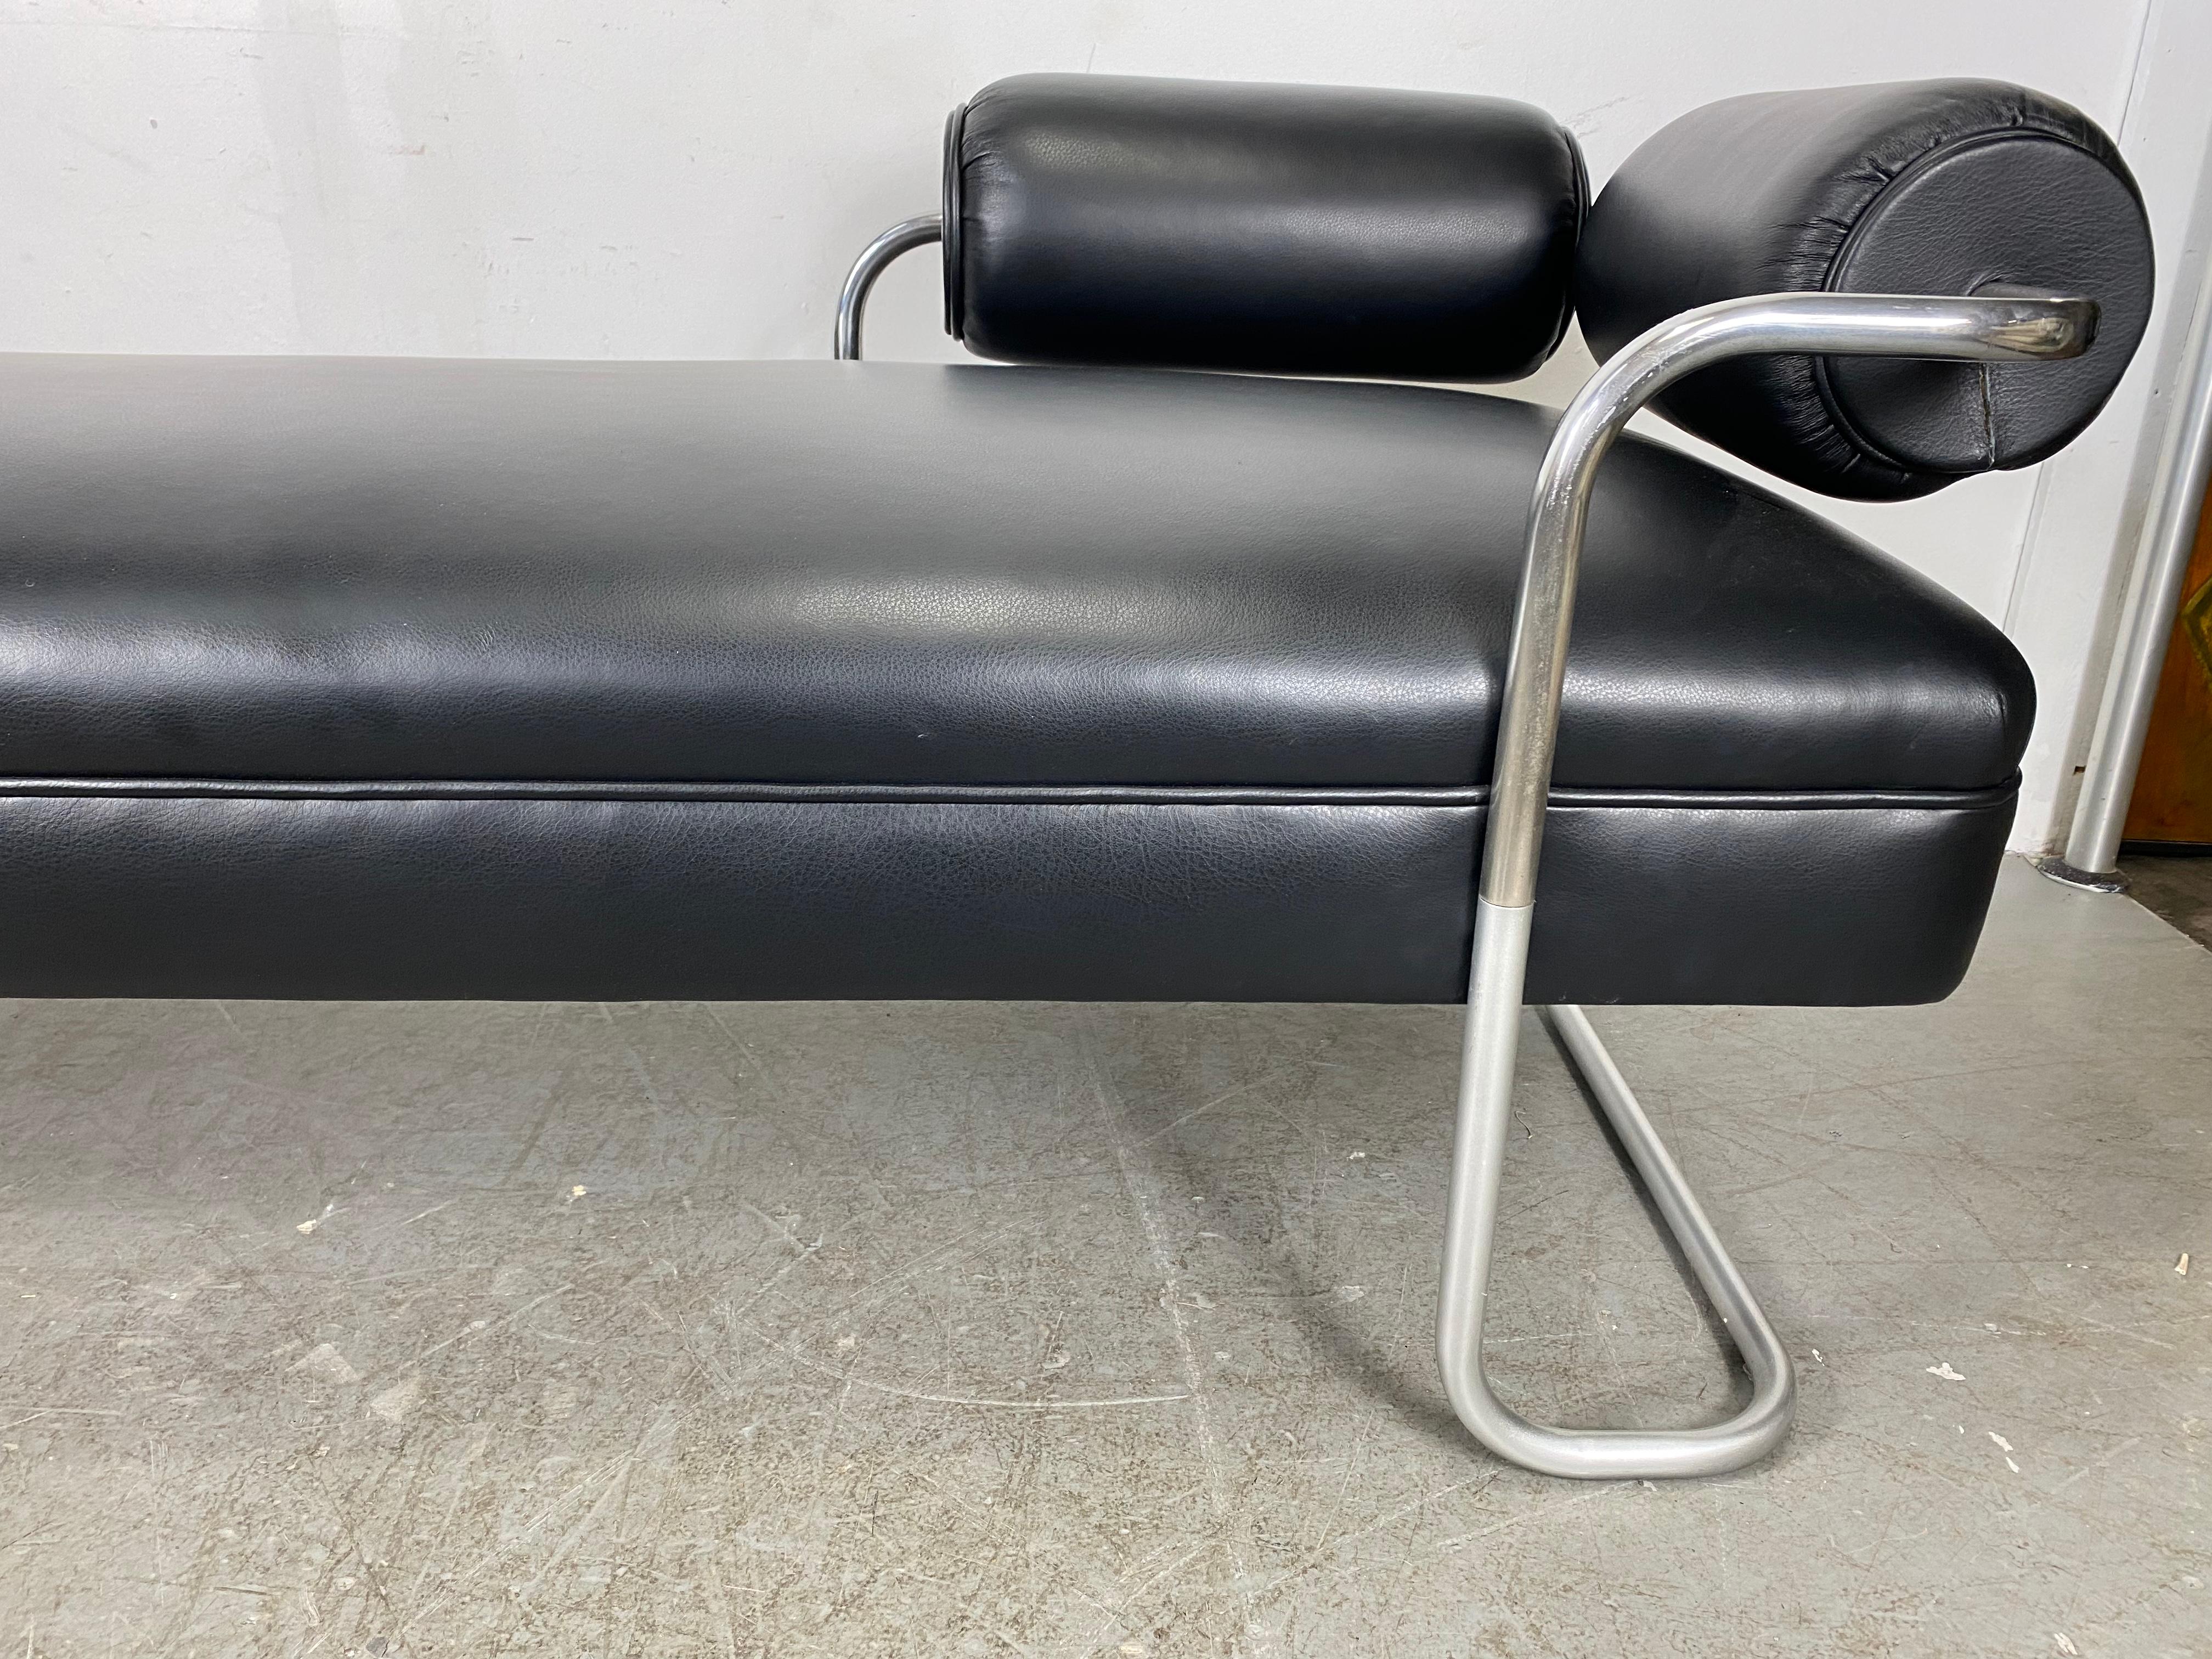 Unusual Tubular Chrome and Leather Bauhaus Chaise Lounge / Daybed 1